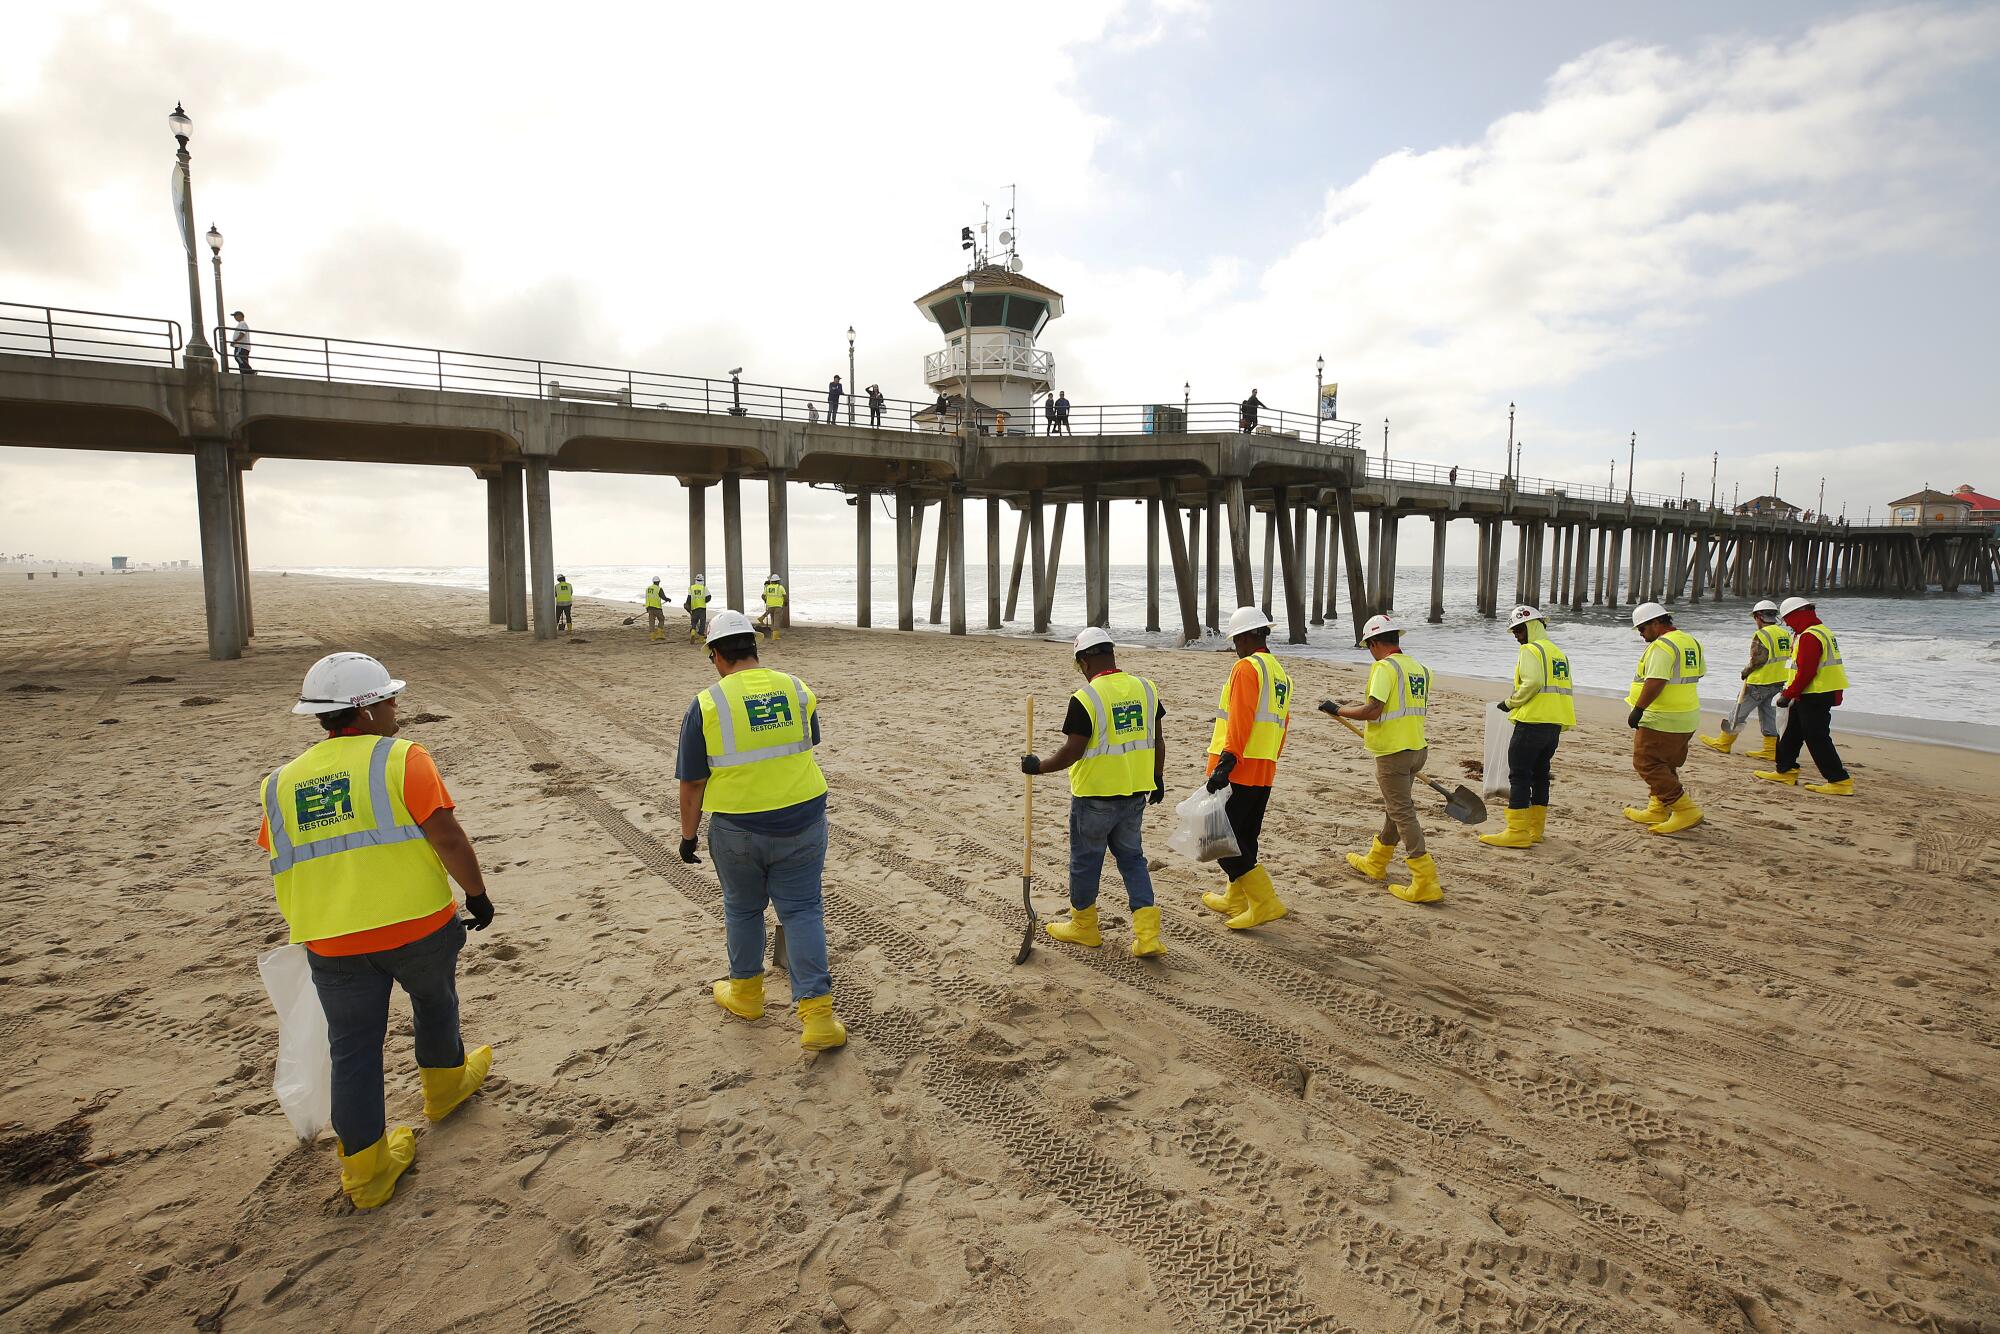 Clean-up crews continue to comb the beach under partly cloudy skies at the Huntington Beach Pier